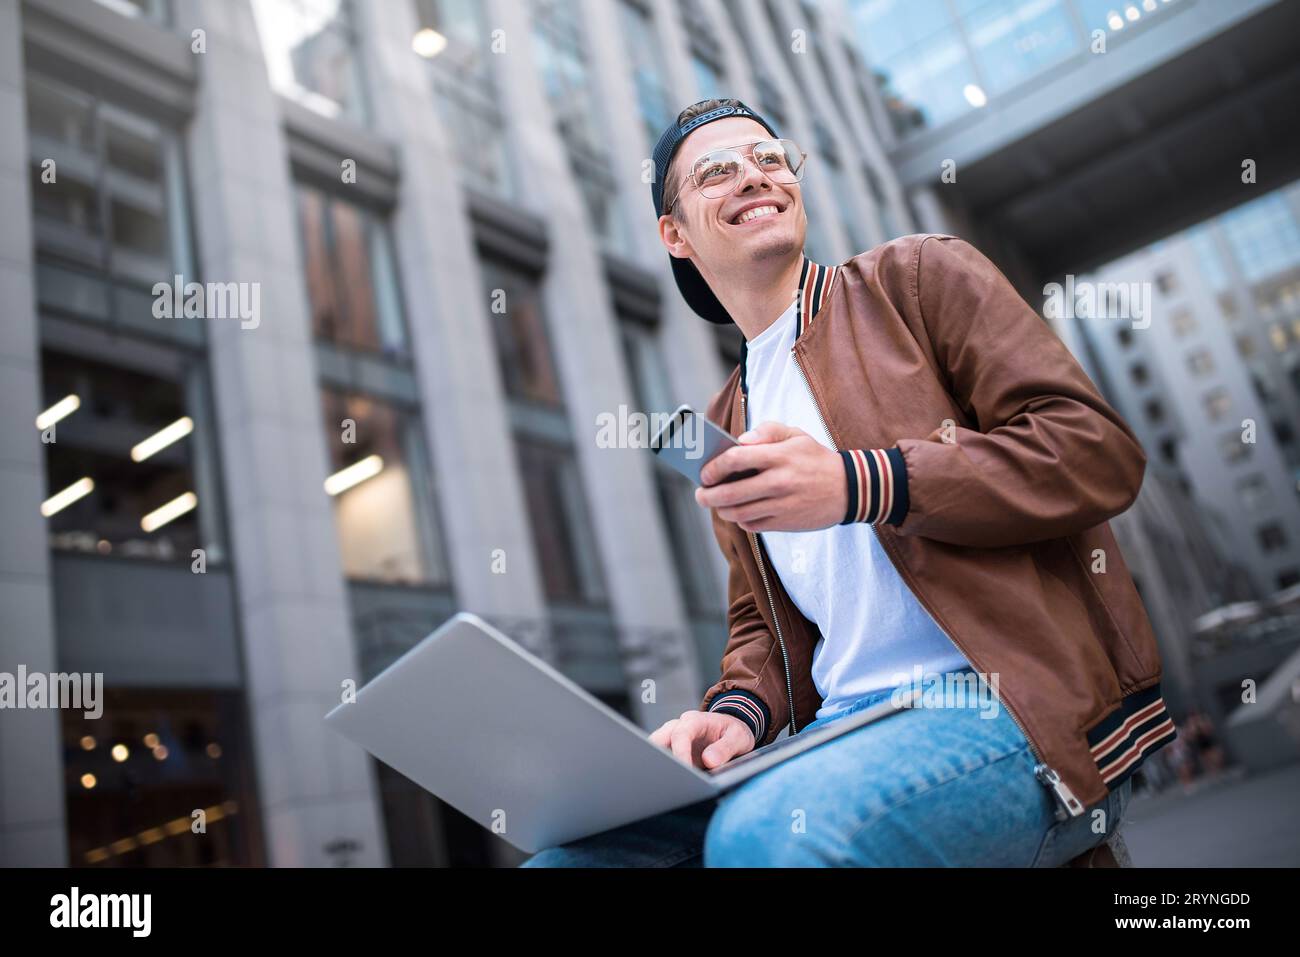 Smart attitude. Positive handsome man using a laptop and sitting in the street while surfing the internet have a web conference. Stock Photo